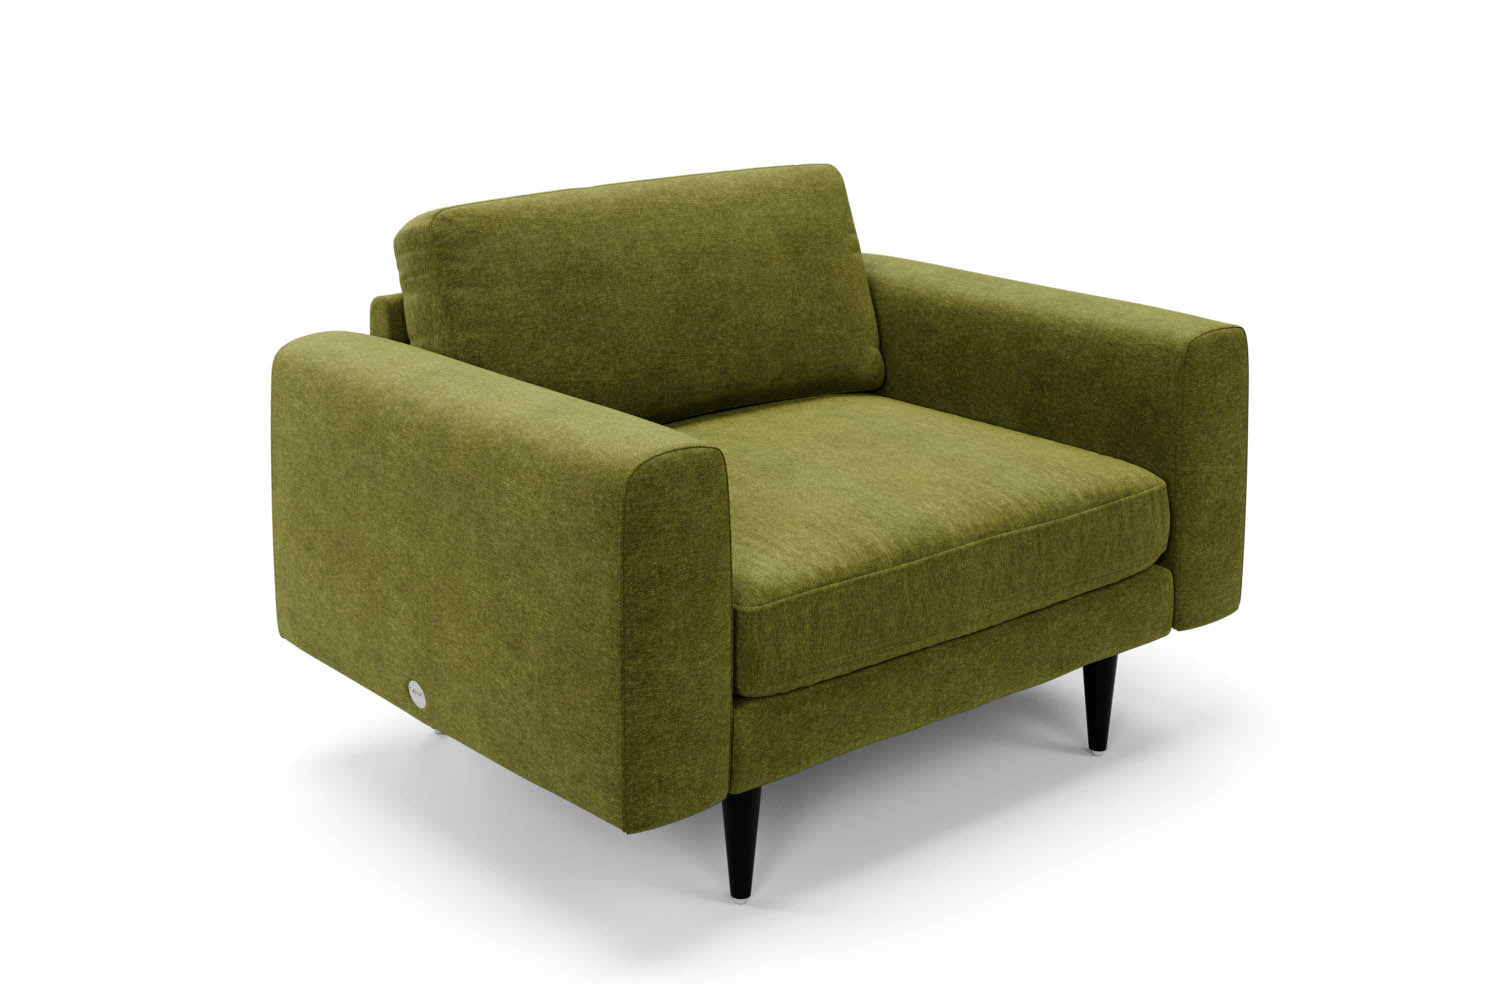 The Big Chill Snuggler in Moss Chenille with black legs